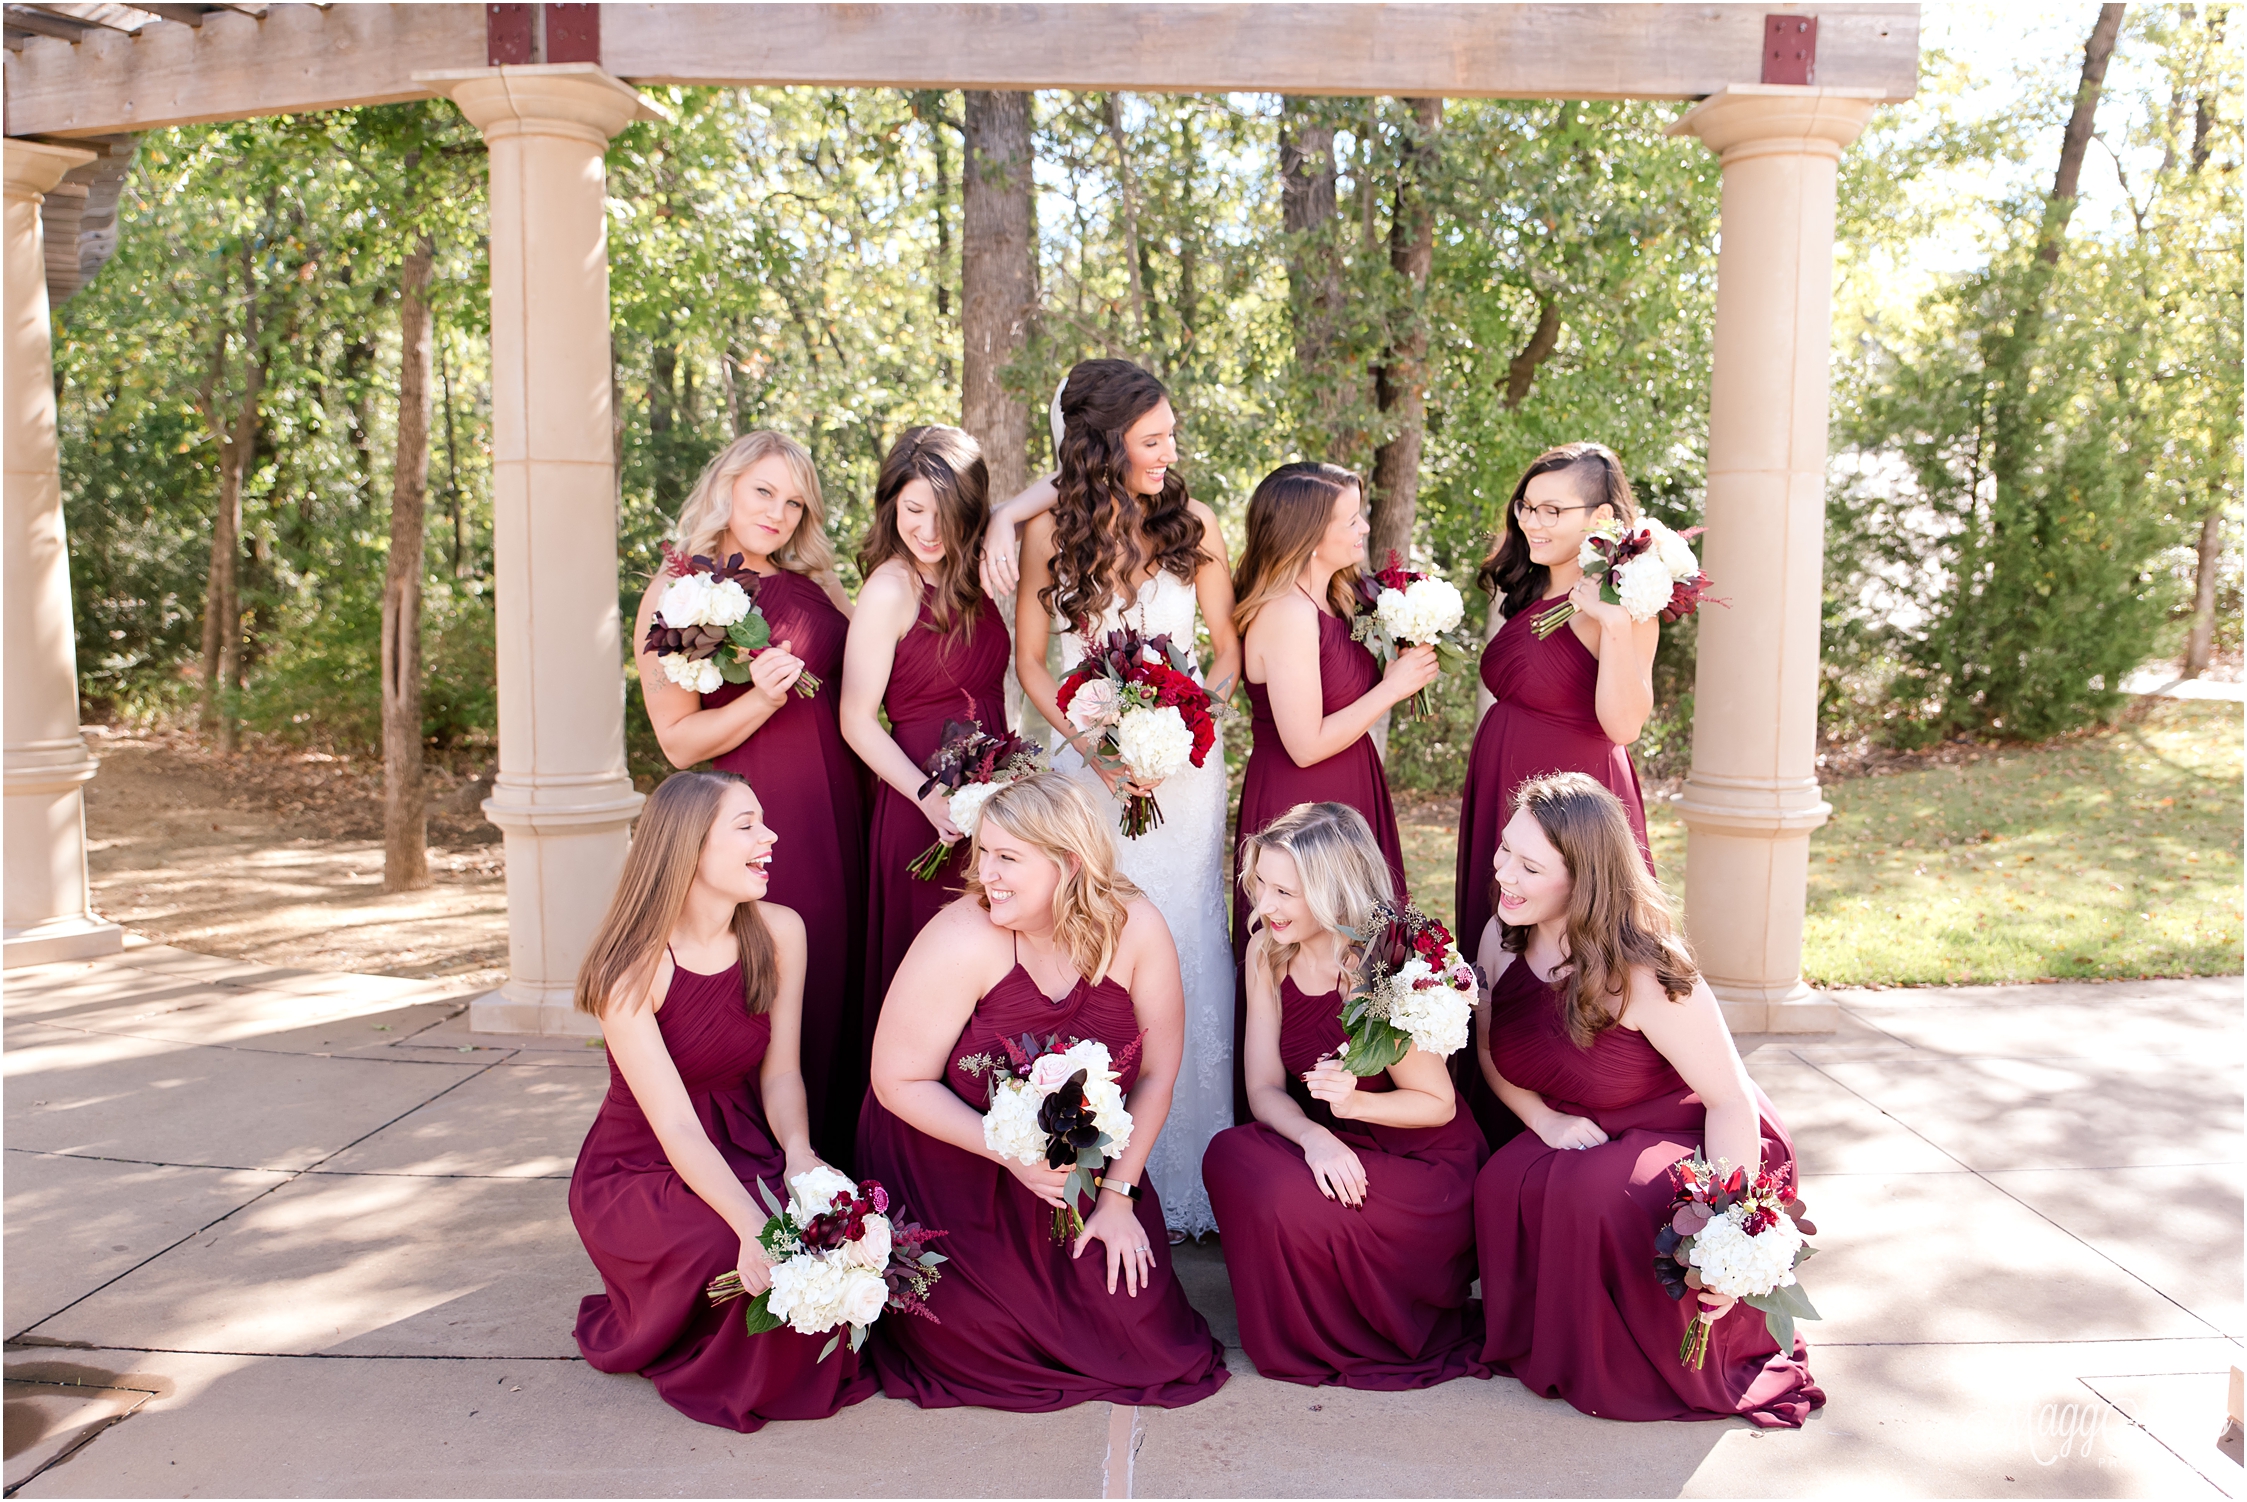 Bride and Groom, Love, Husband and Wife, Dance, Wedding, Professional Photographer, Professional Photography, Beautiful, DFW Wedding Photographer, MaggShots Photography, MaggShots, Bridesmaids, Flower Girls, Squad